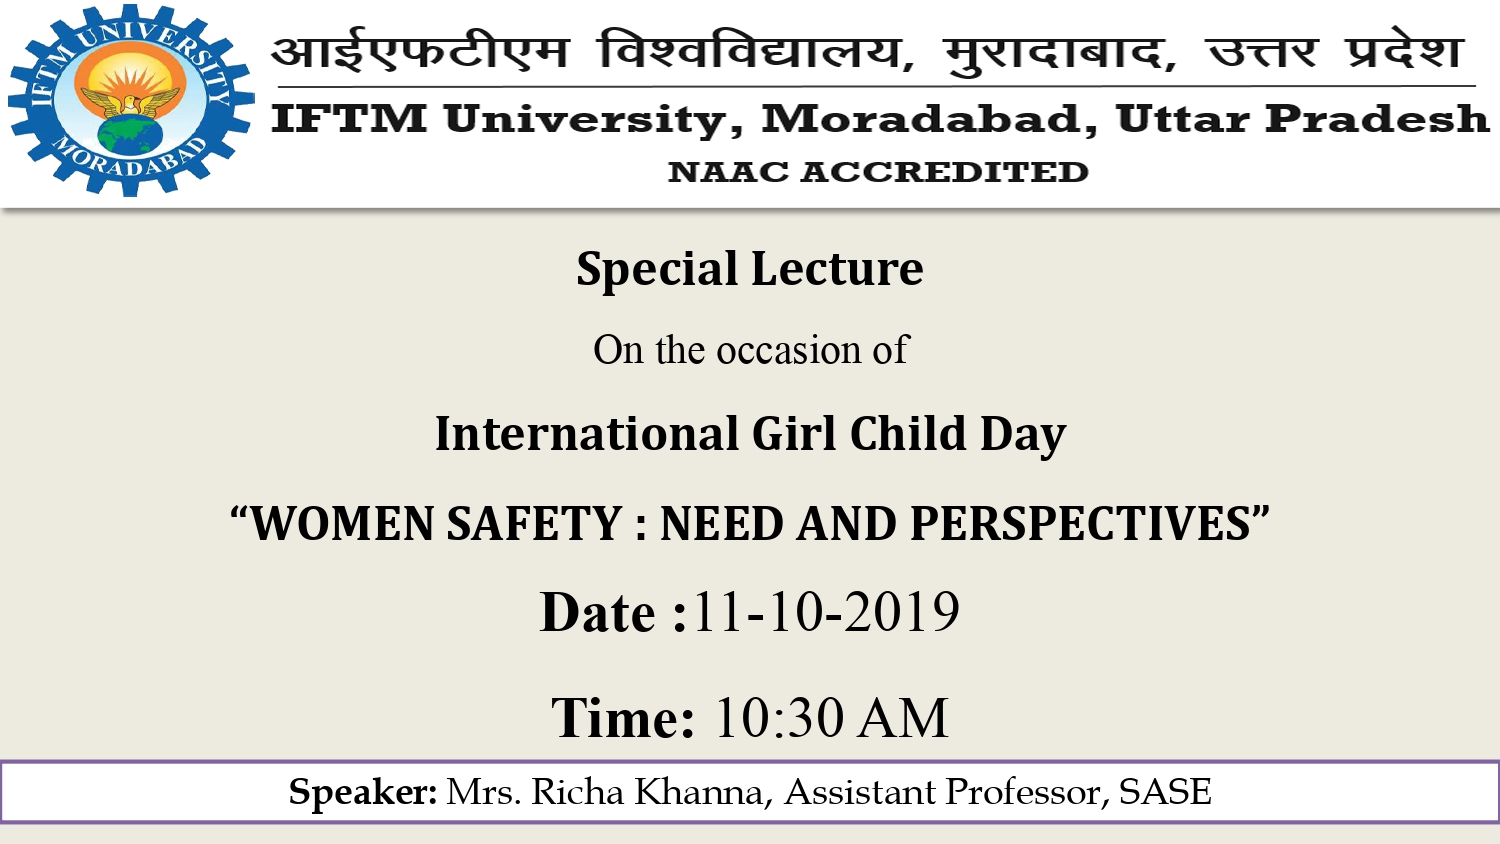 Special Lecture on Women Safety